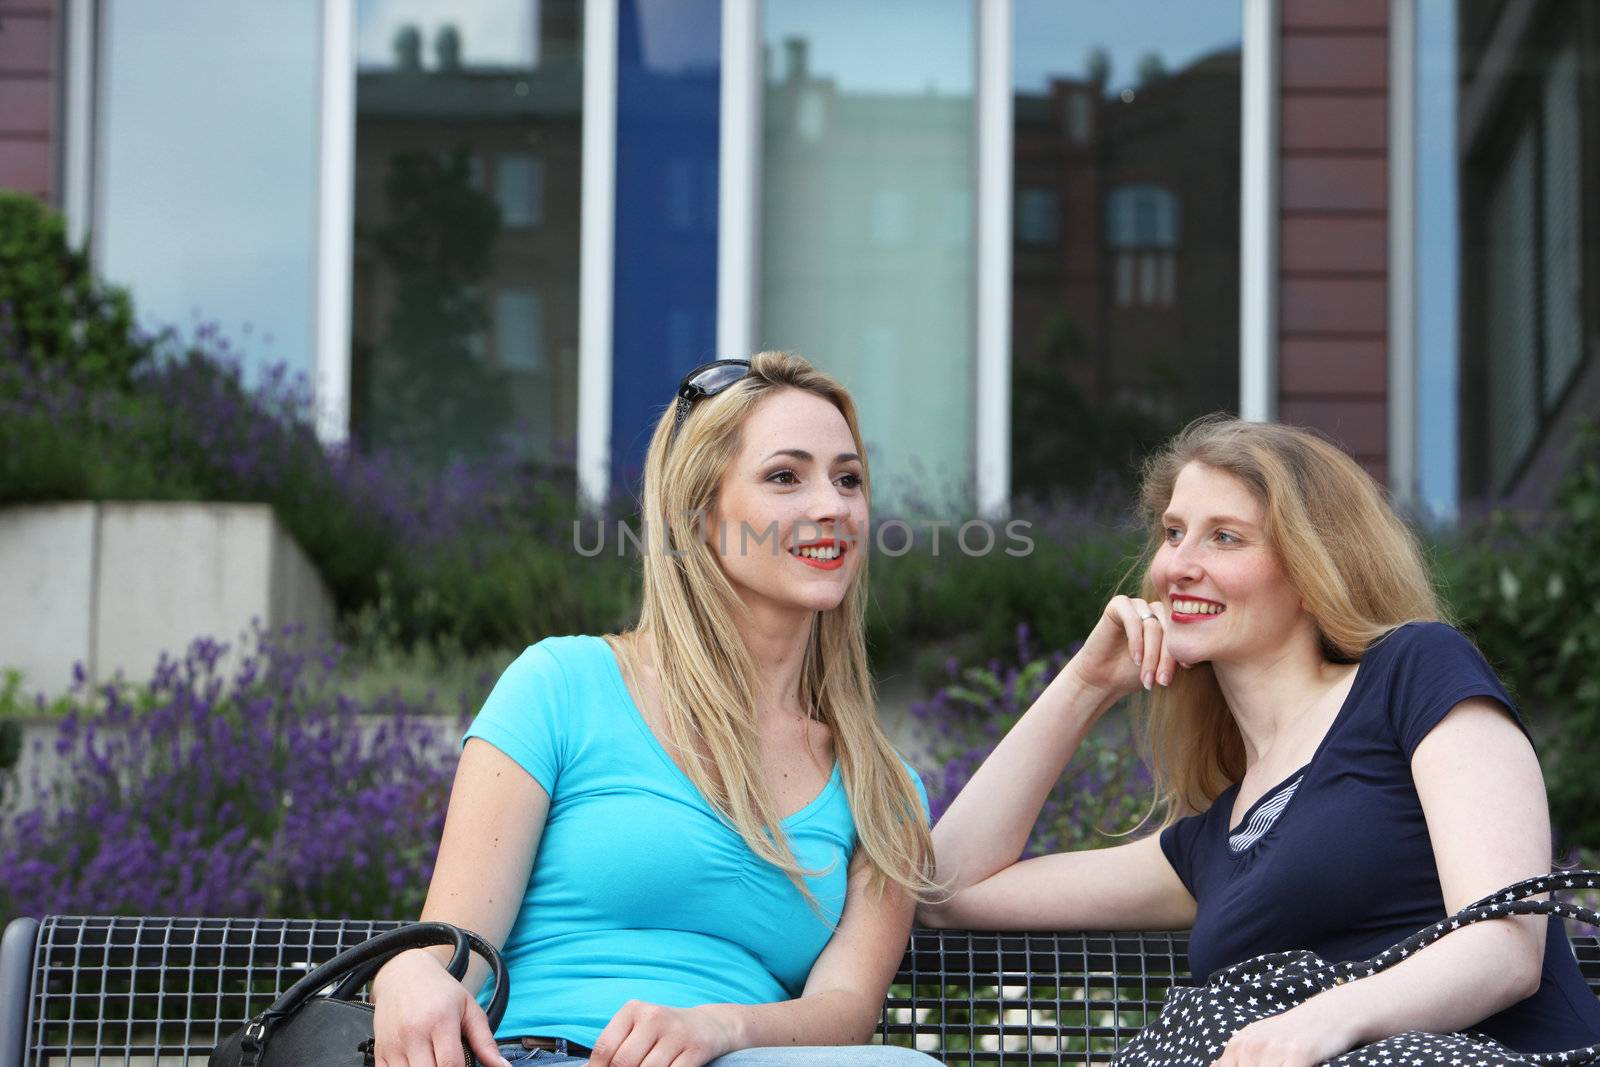 Two attractive young women relaxing in the sunshine on a metal bench chatting in front of a building Two women relaxing in the sunshine on a metal bench chatting in front of a building 